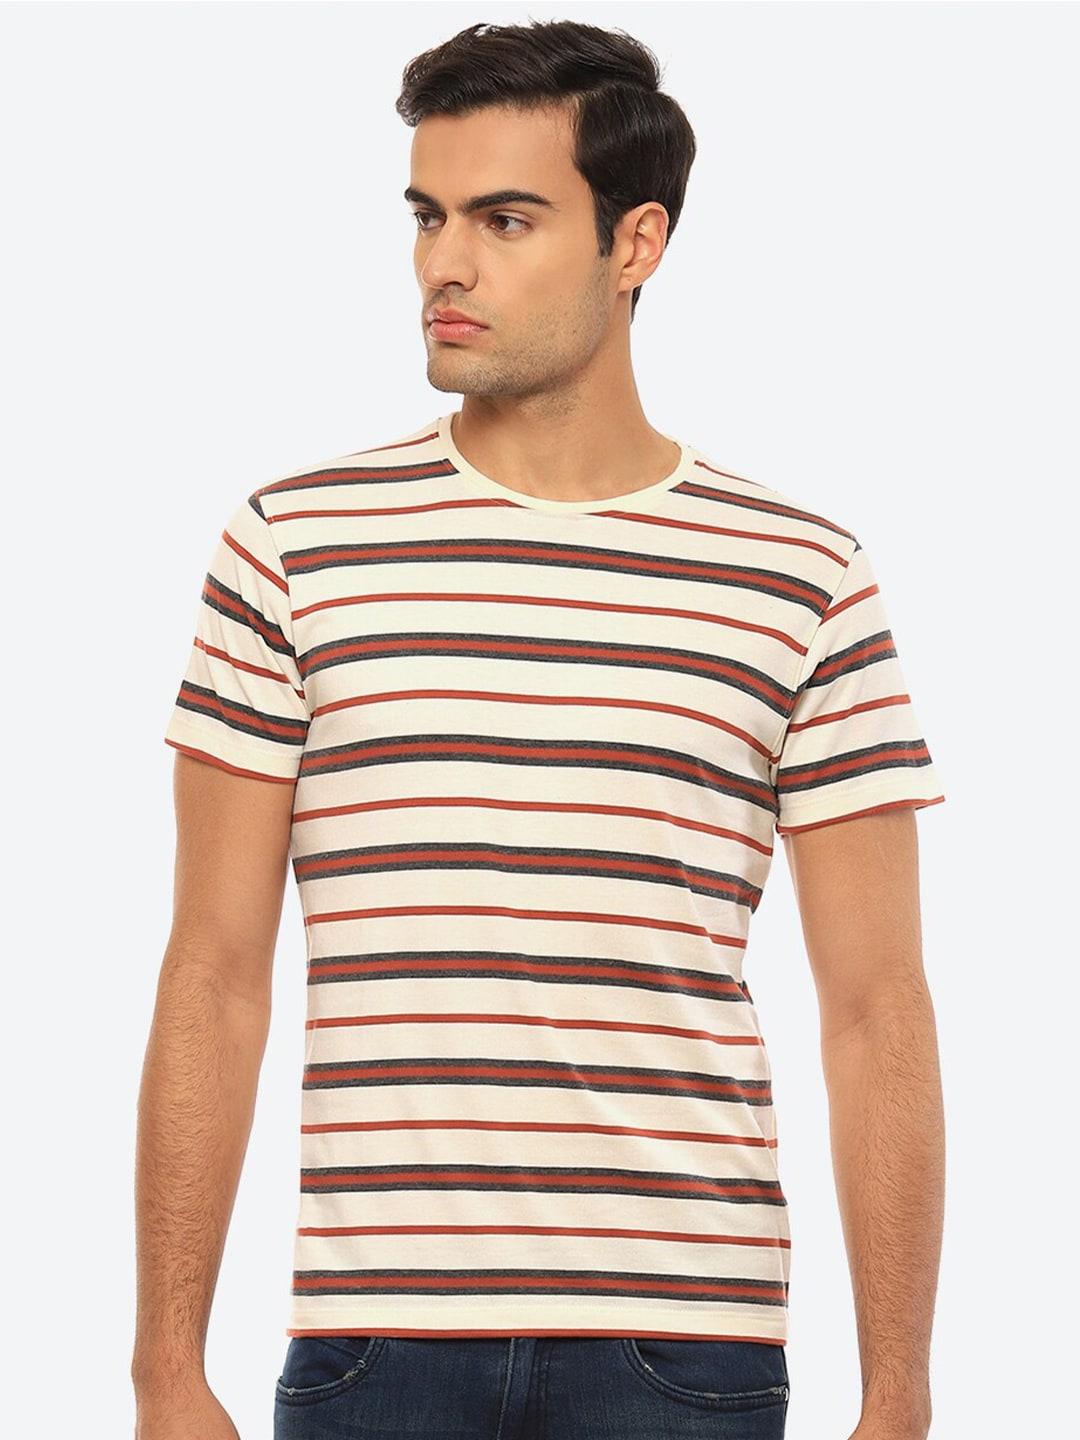 2bme-striped-round-neck-short-sleeves-pure-cotton-t-shirt